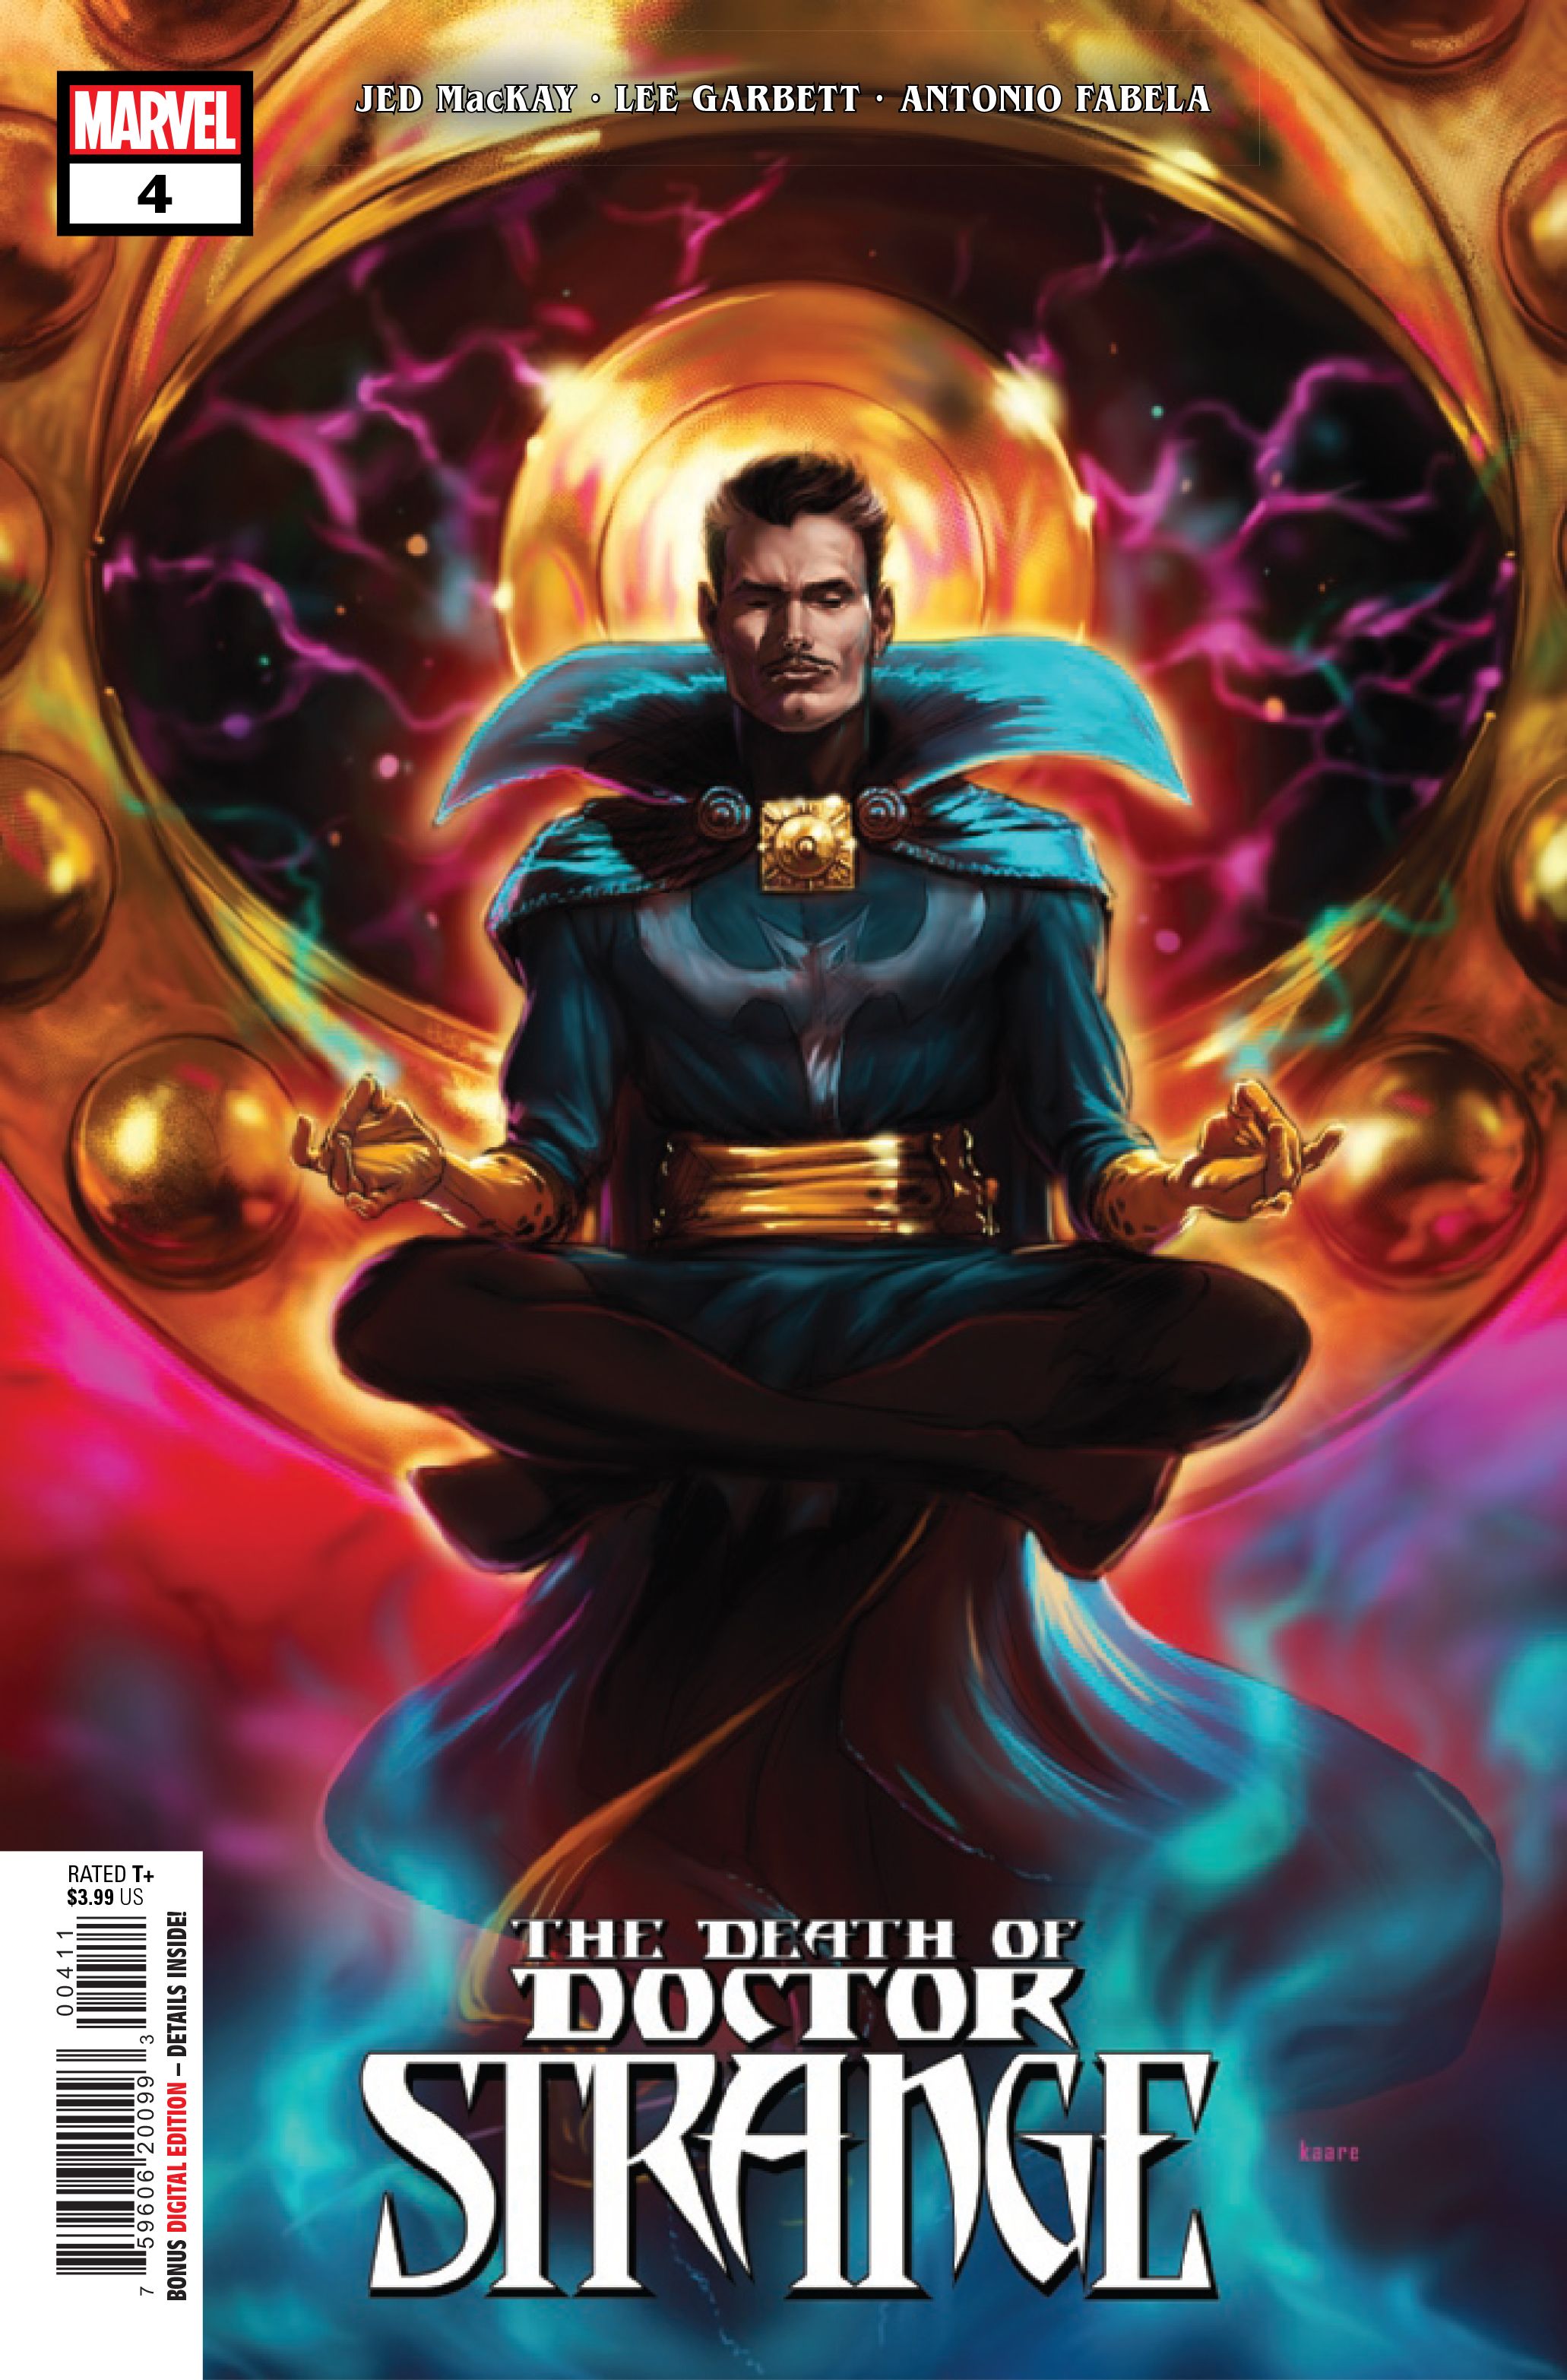 Cover for the Death of Doctor Strange #4, by Jed MacKay, Lee Garbett, Antonio Fabela and VC's Cory Petit.